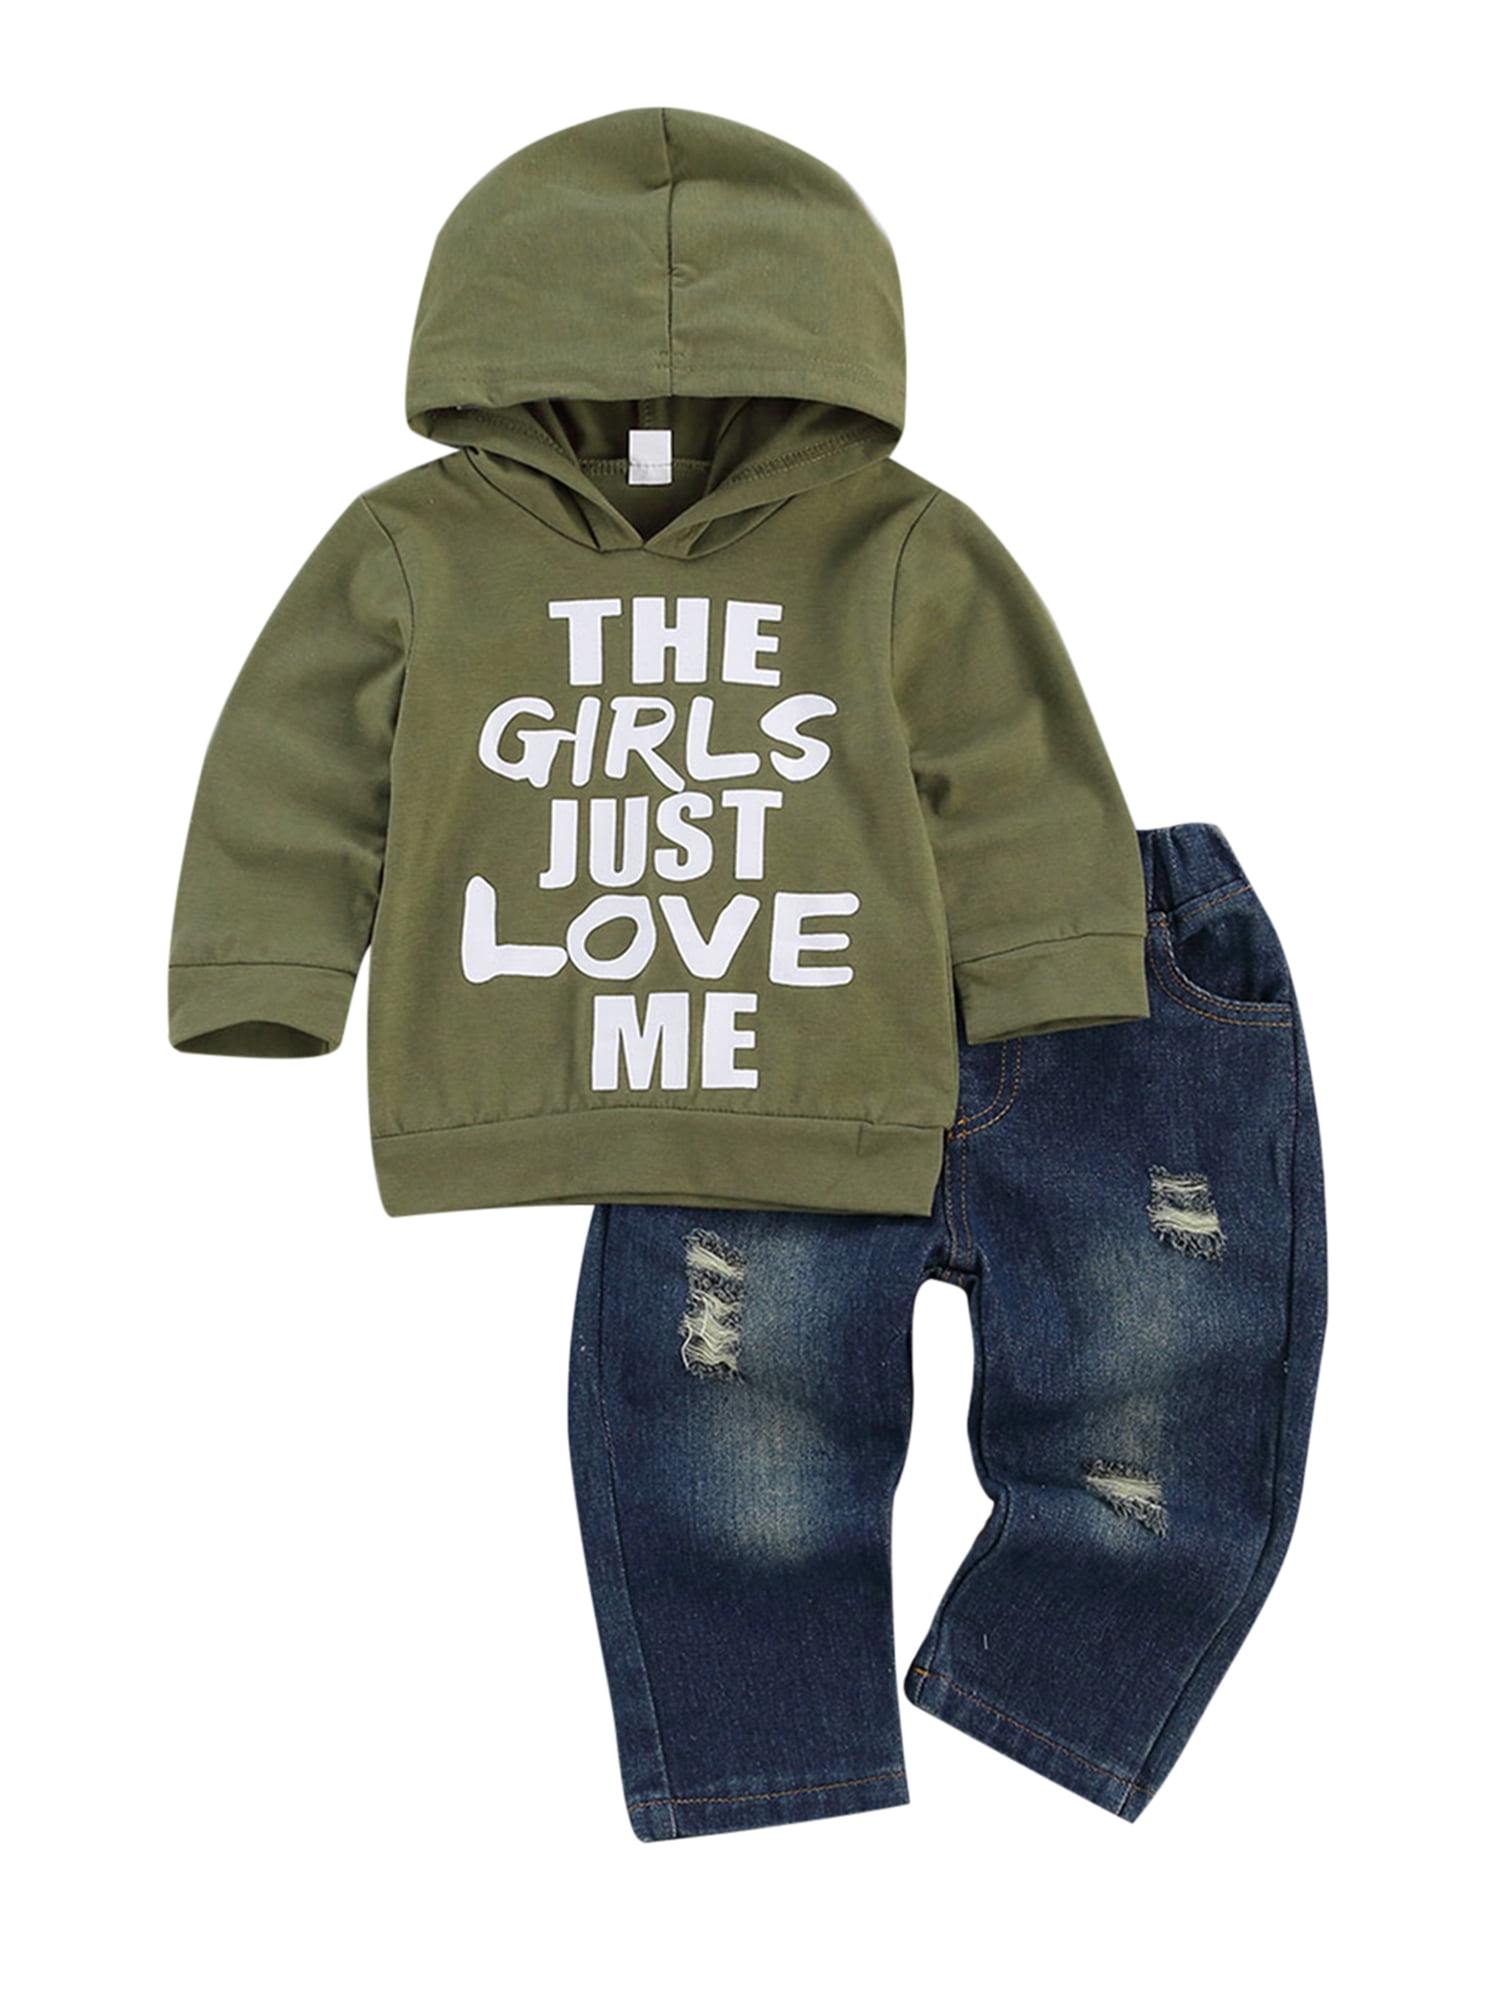 2PC Toddler Kid Baby Boy Letter Long Sleeve Tops Pants Hooded Coat Outfit Set 63 